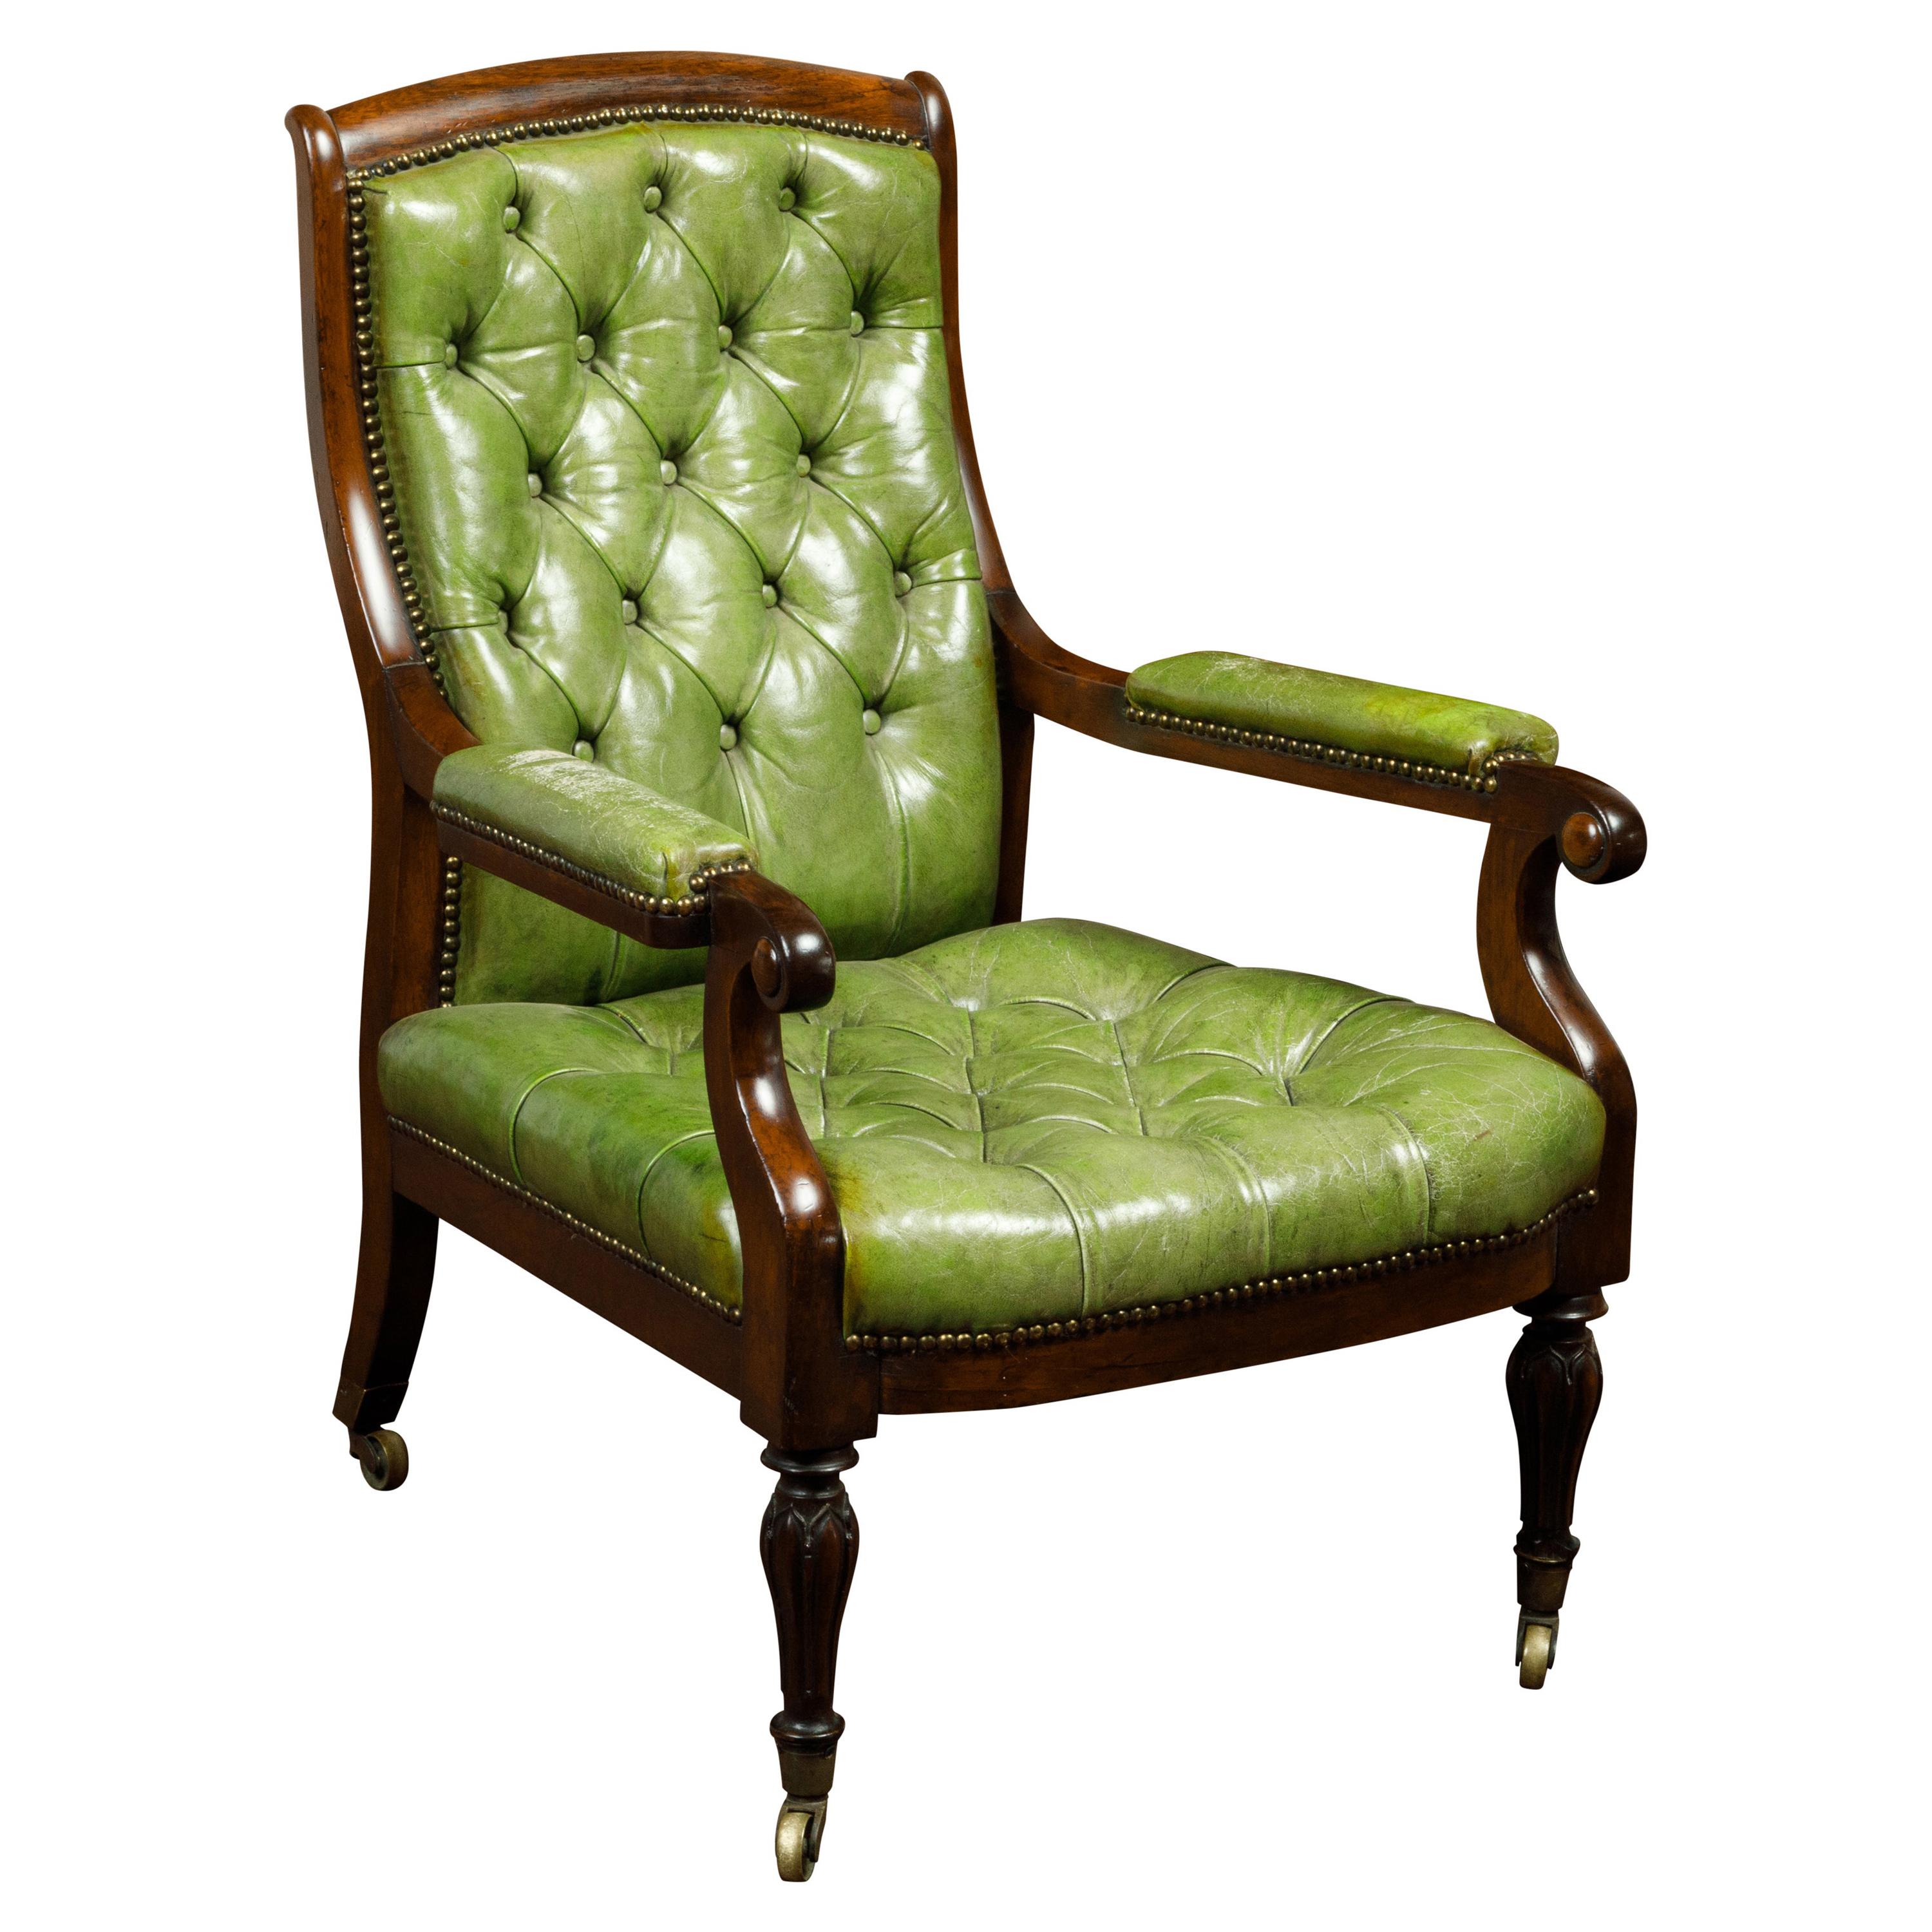 English 1830s Regency Green Tufted Leather Club Chair with Scrolling Arms For Sale